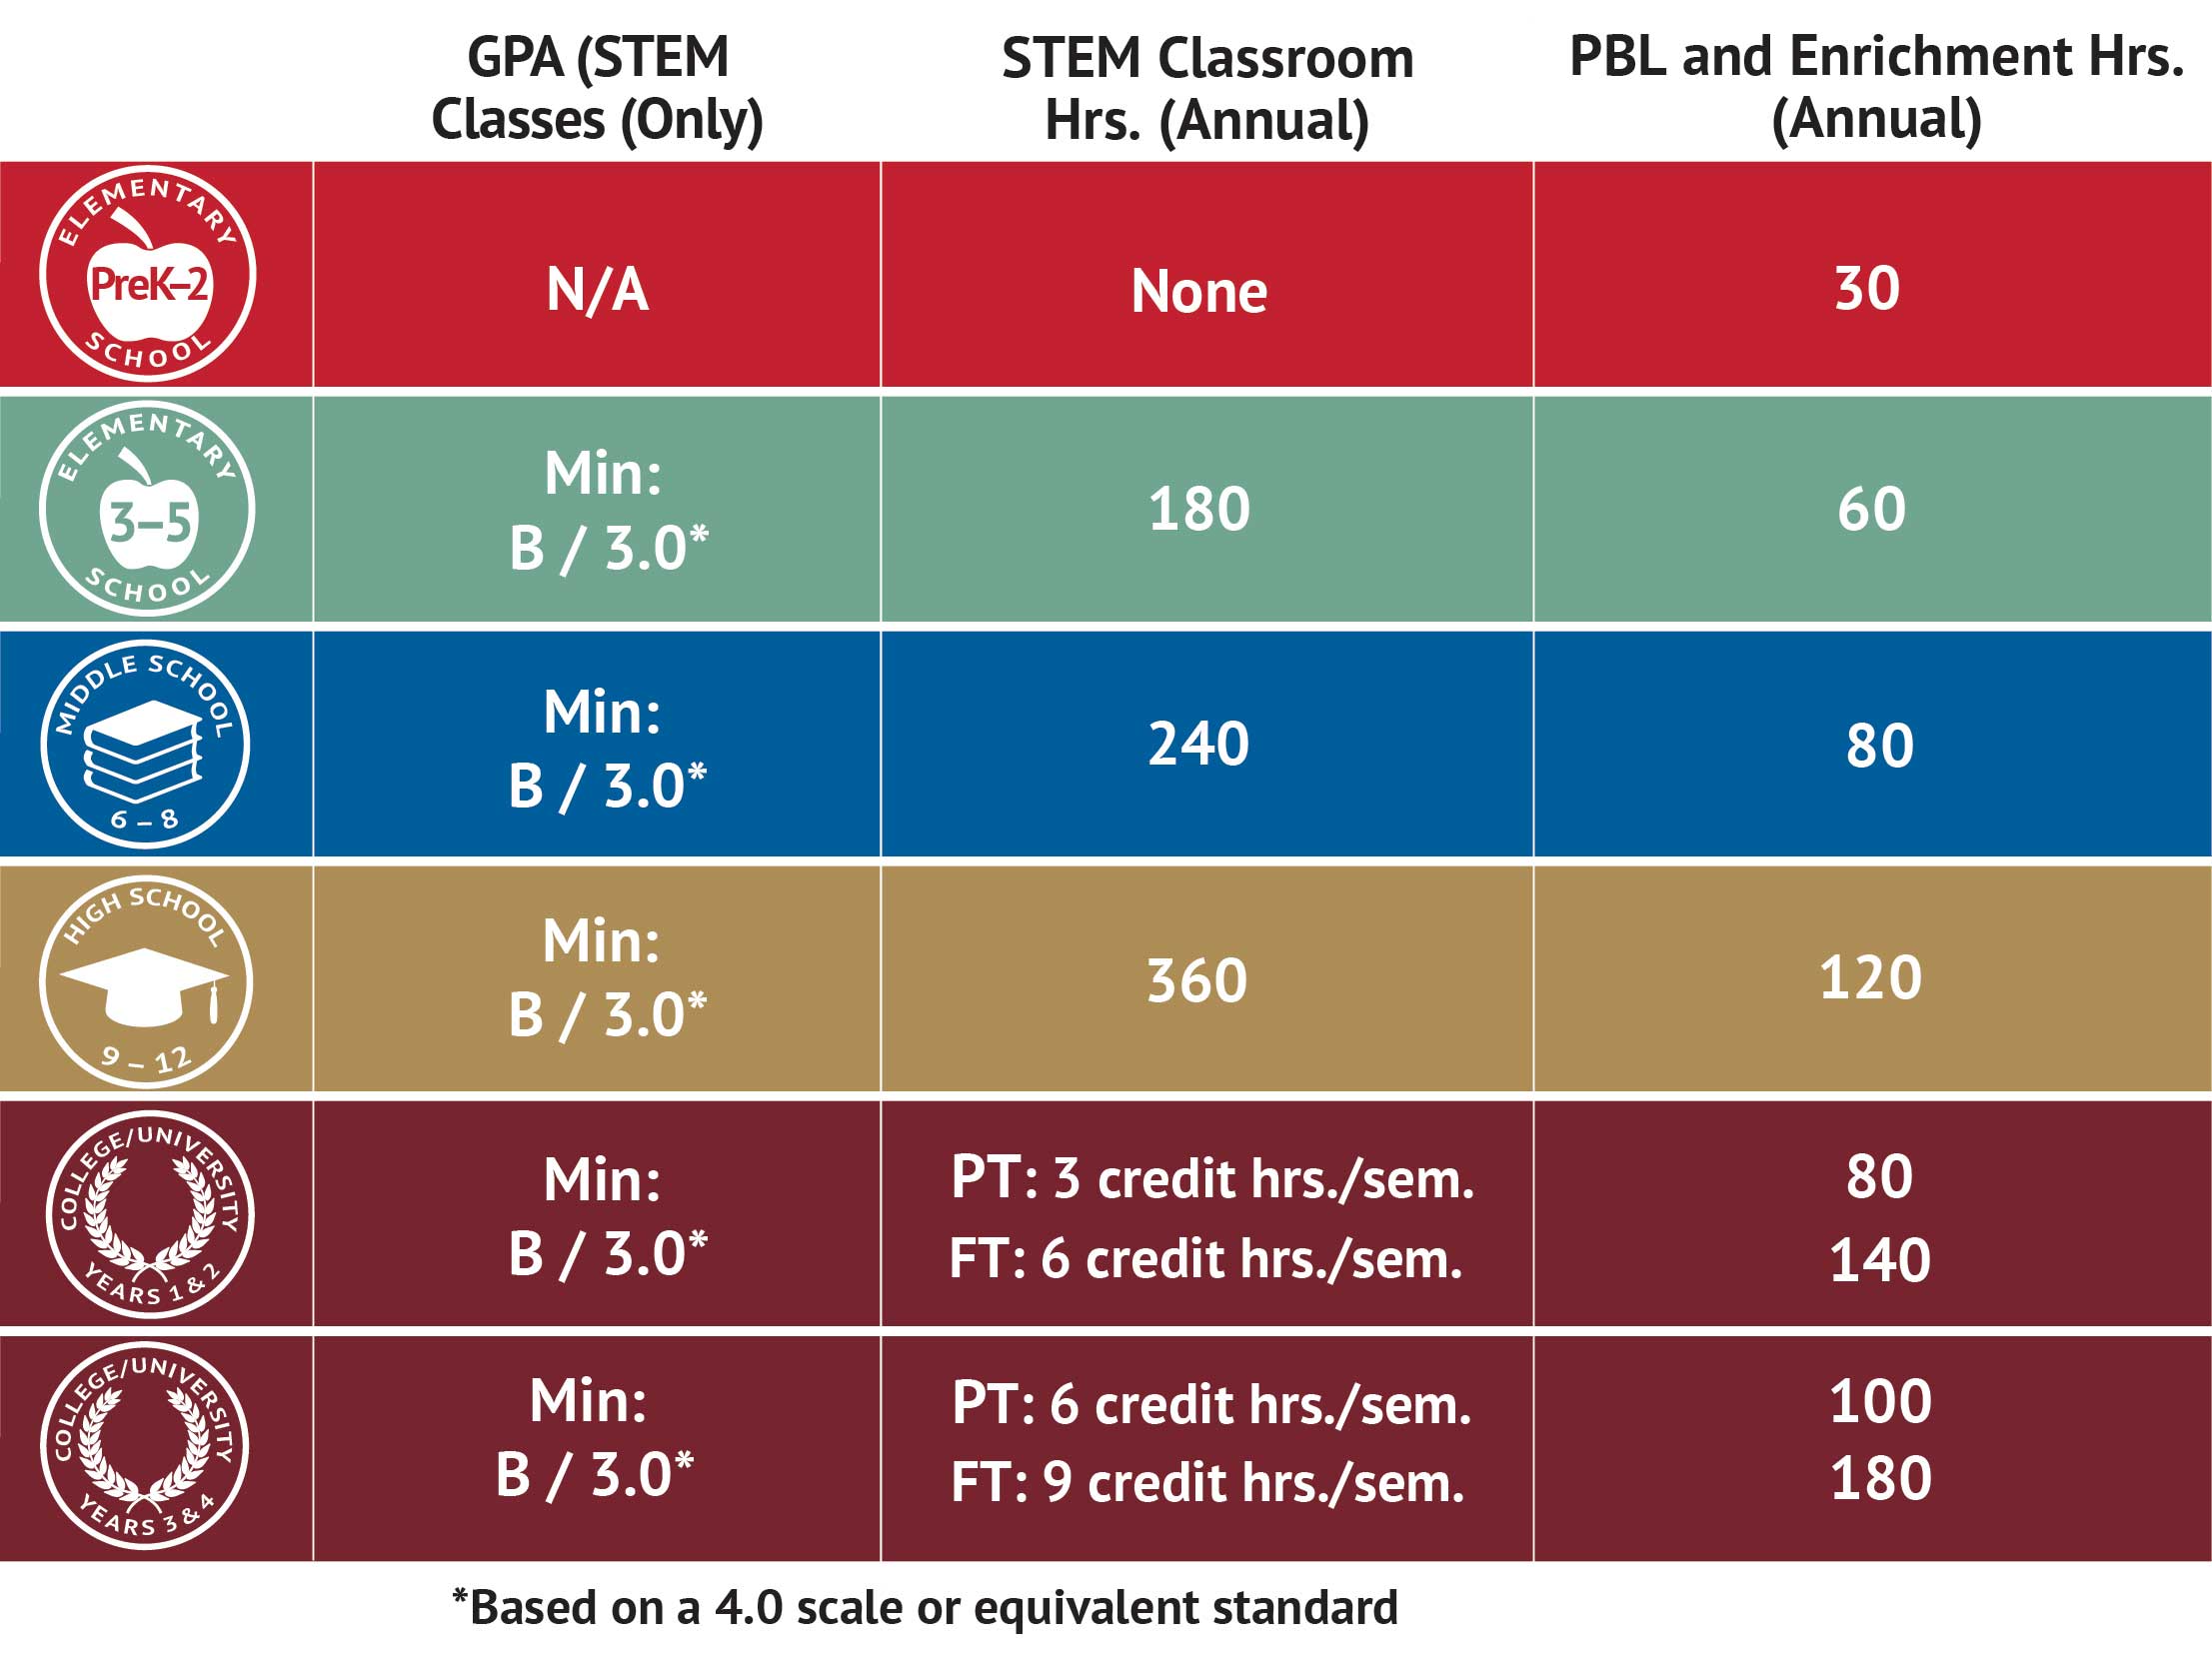 A visual chart which describes the minimum requirements for each grade level in the categories of GPA (stem classes only), annual STEM classroom hours, and PBL and Enrichment Hours. More information regarding each grade level is underneath this graphic.